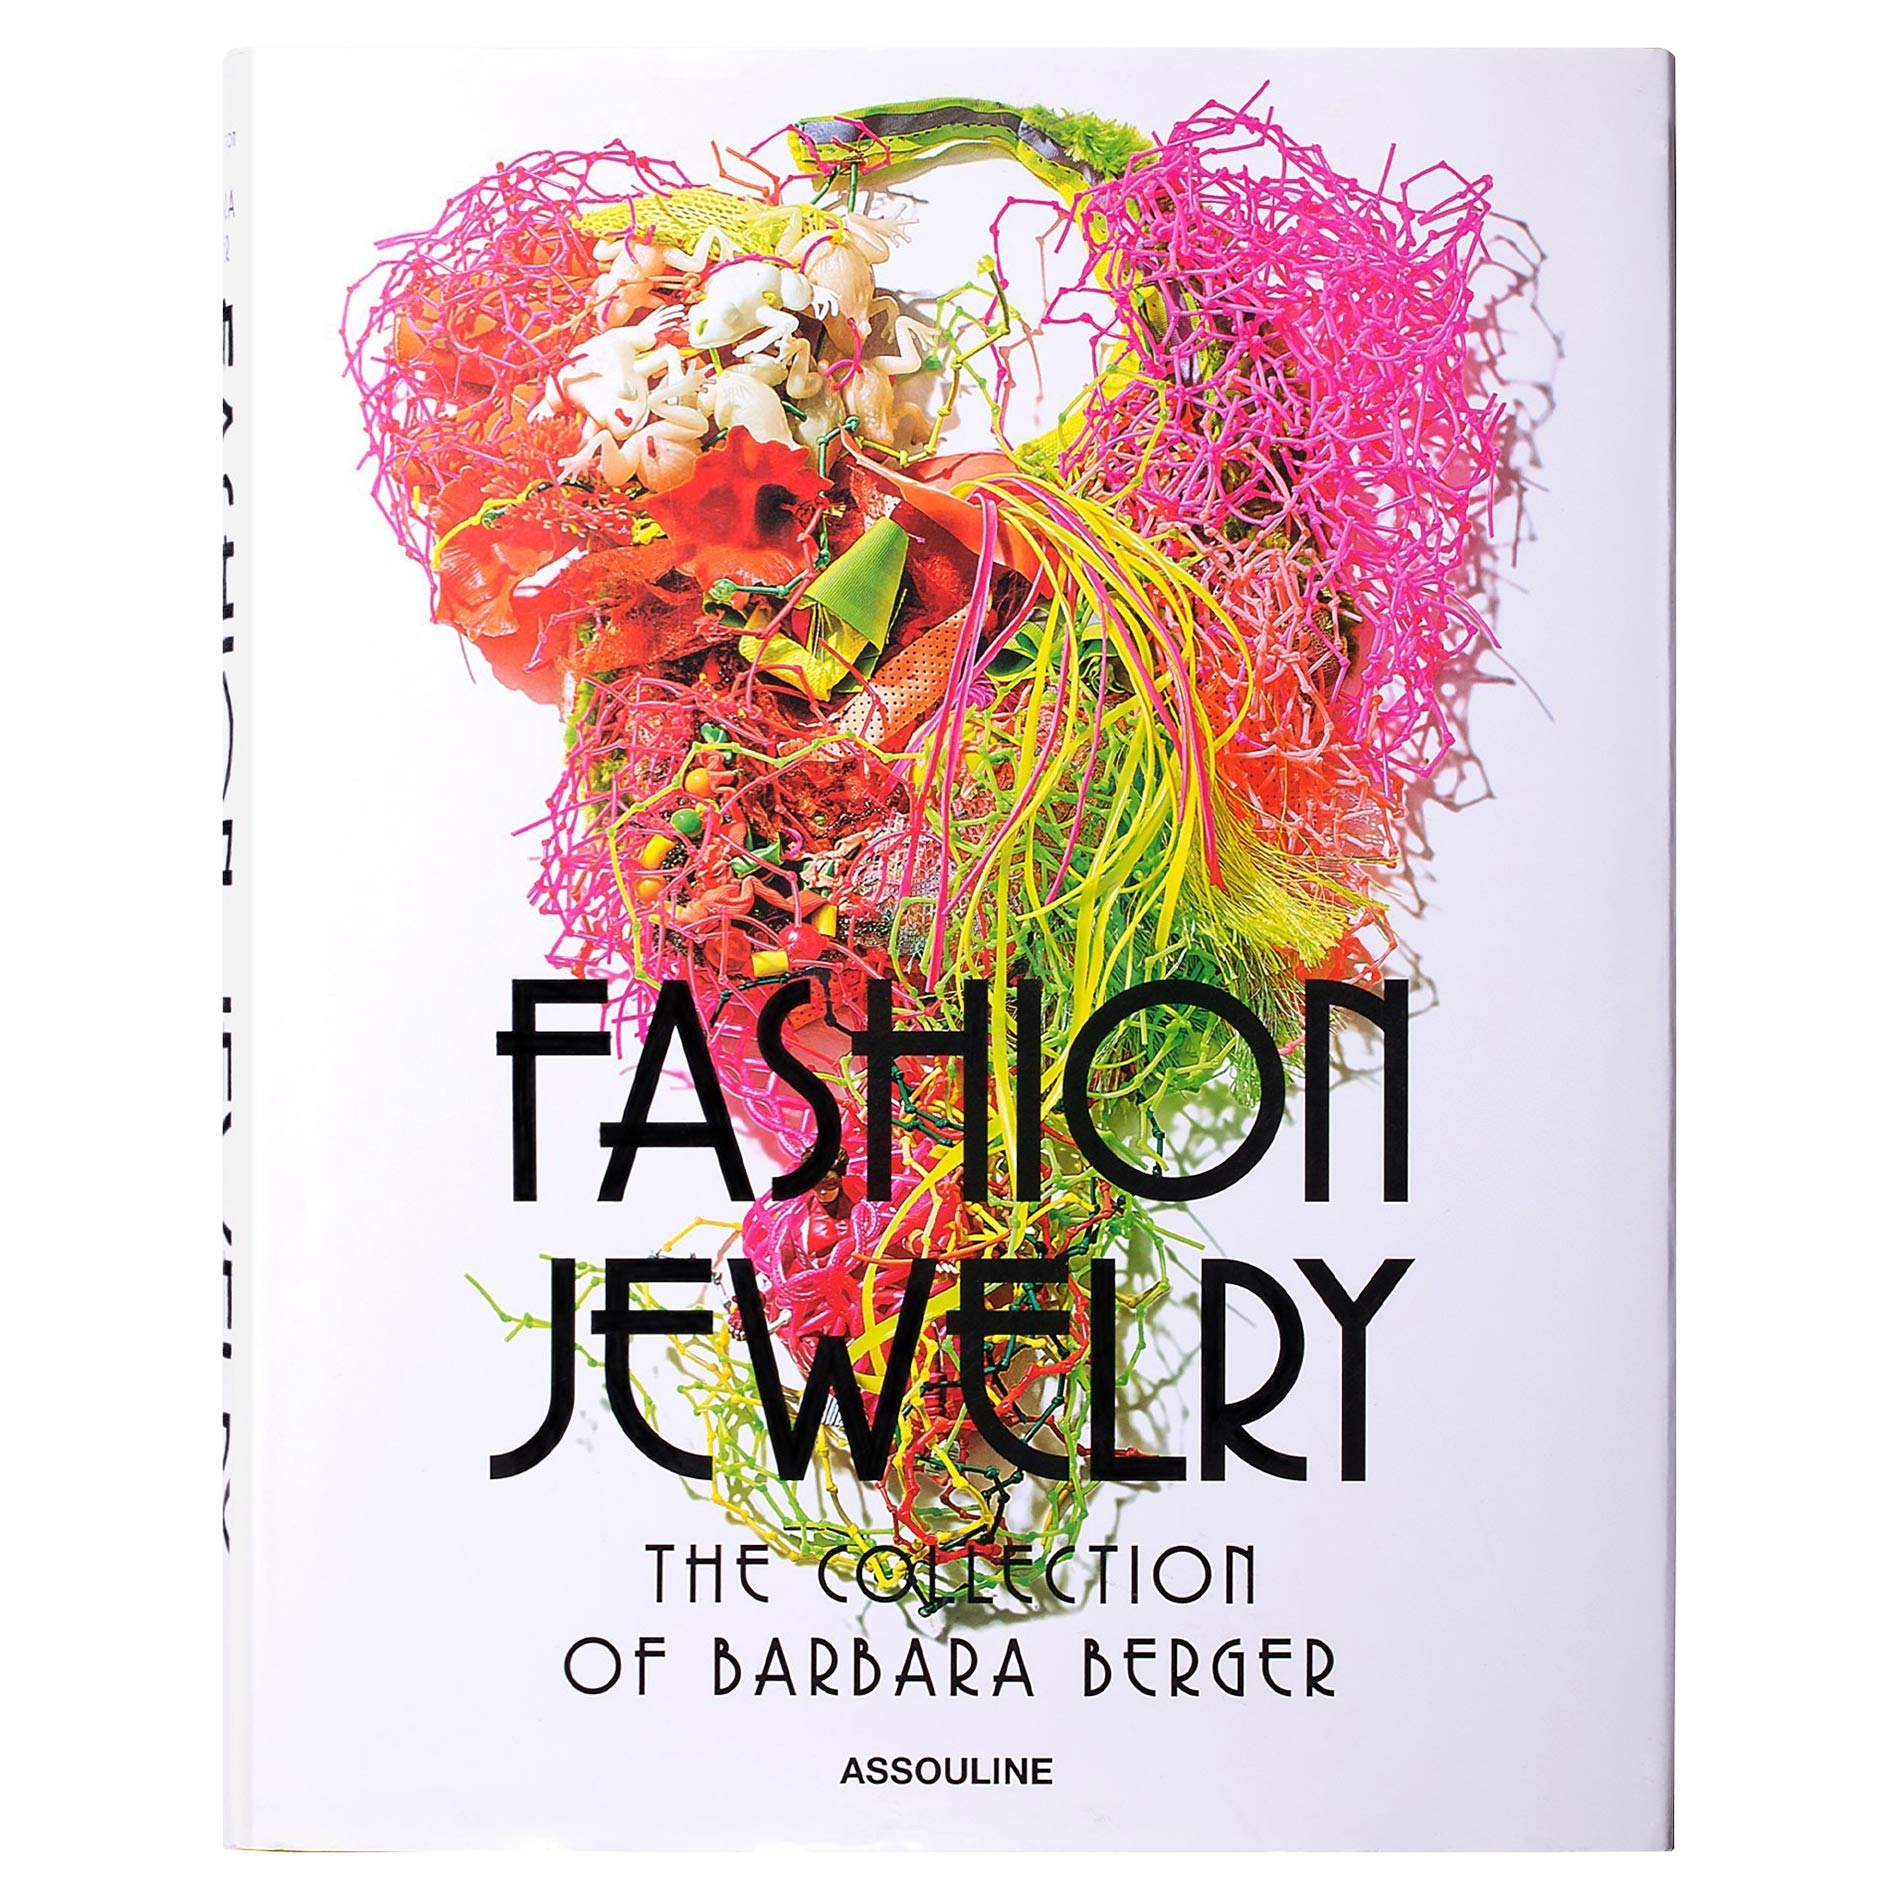 Fashion Jewelry - The Collection of Barbara Berger Assouline Hardcover Book - Image 1